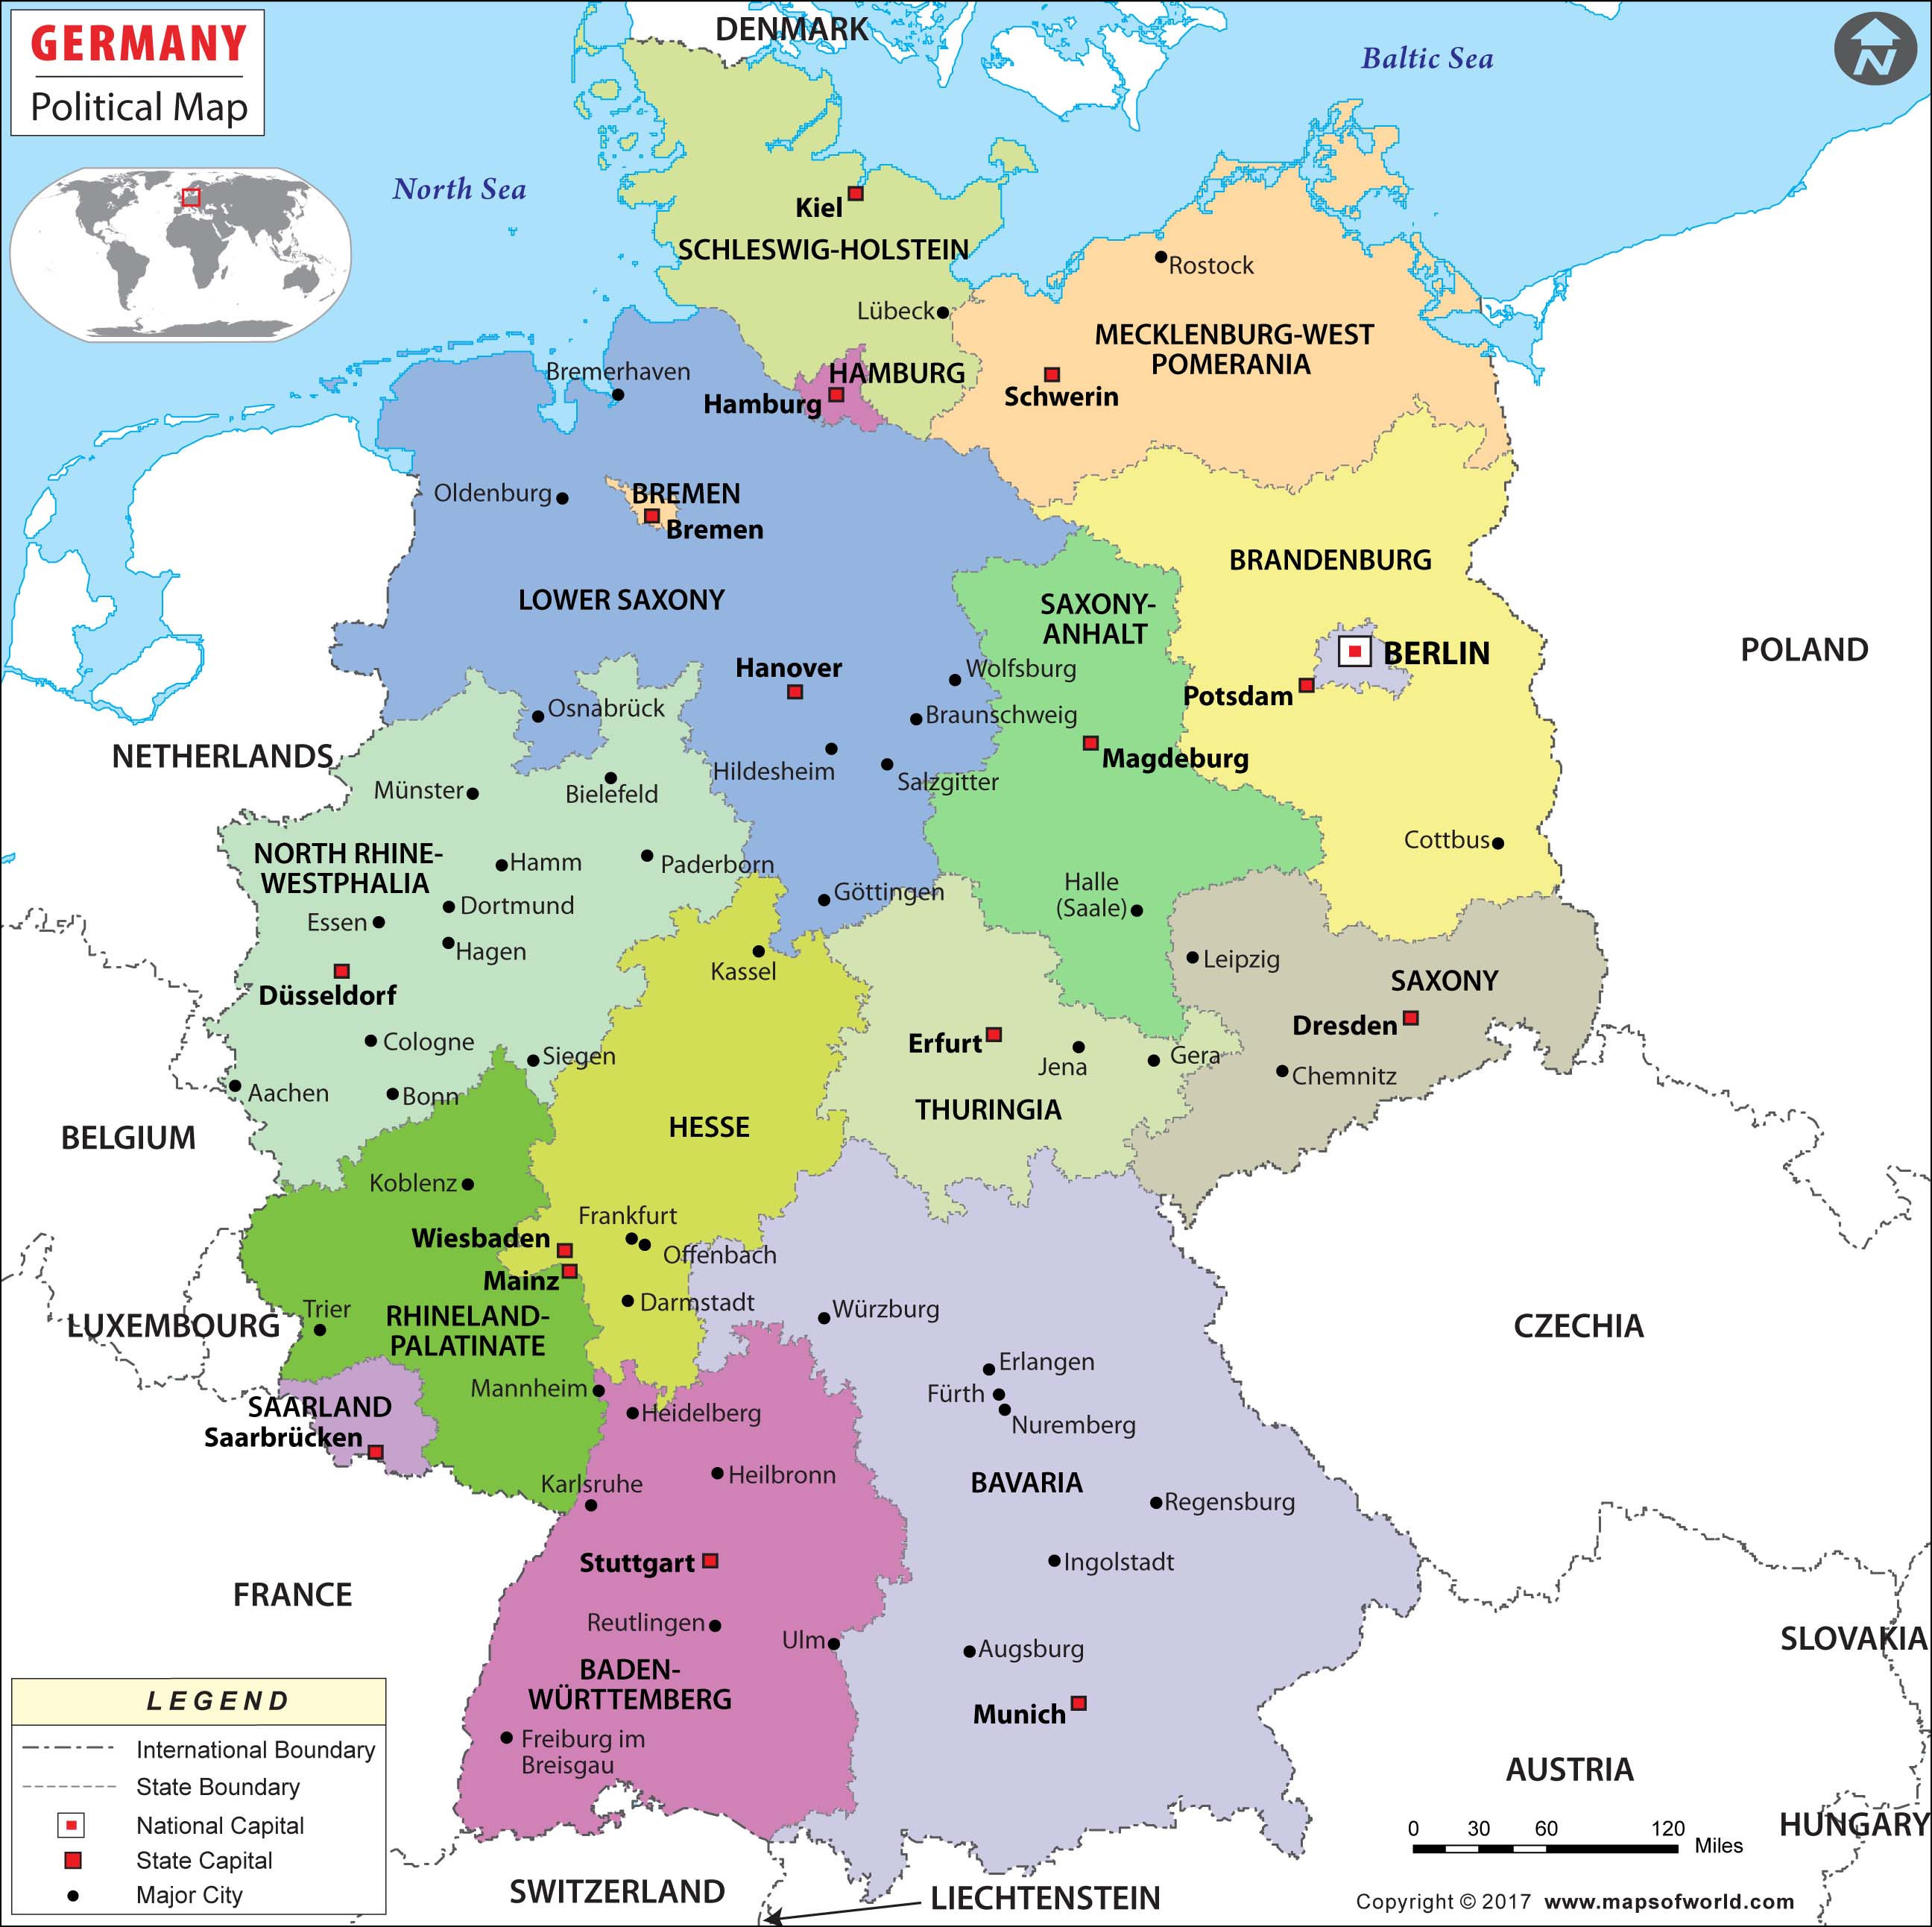 Germany Political Wall Map by Maps of World - MapSales